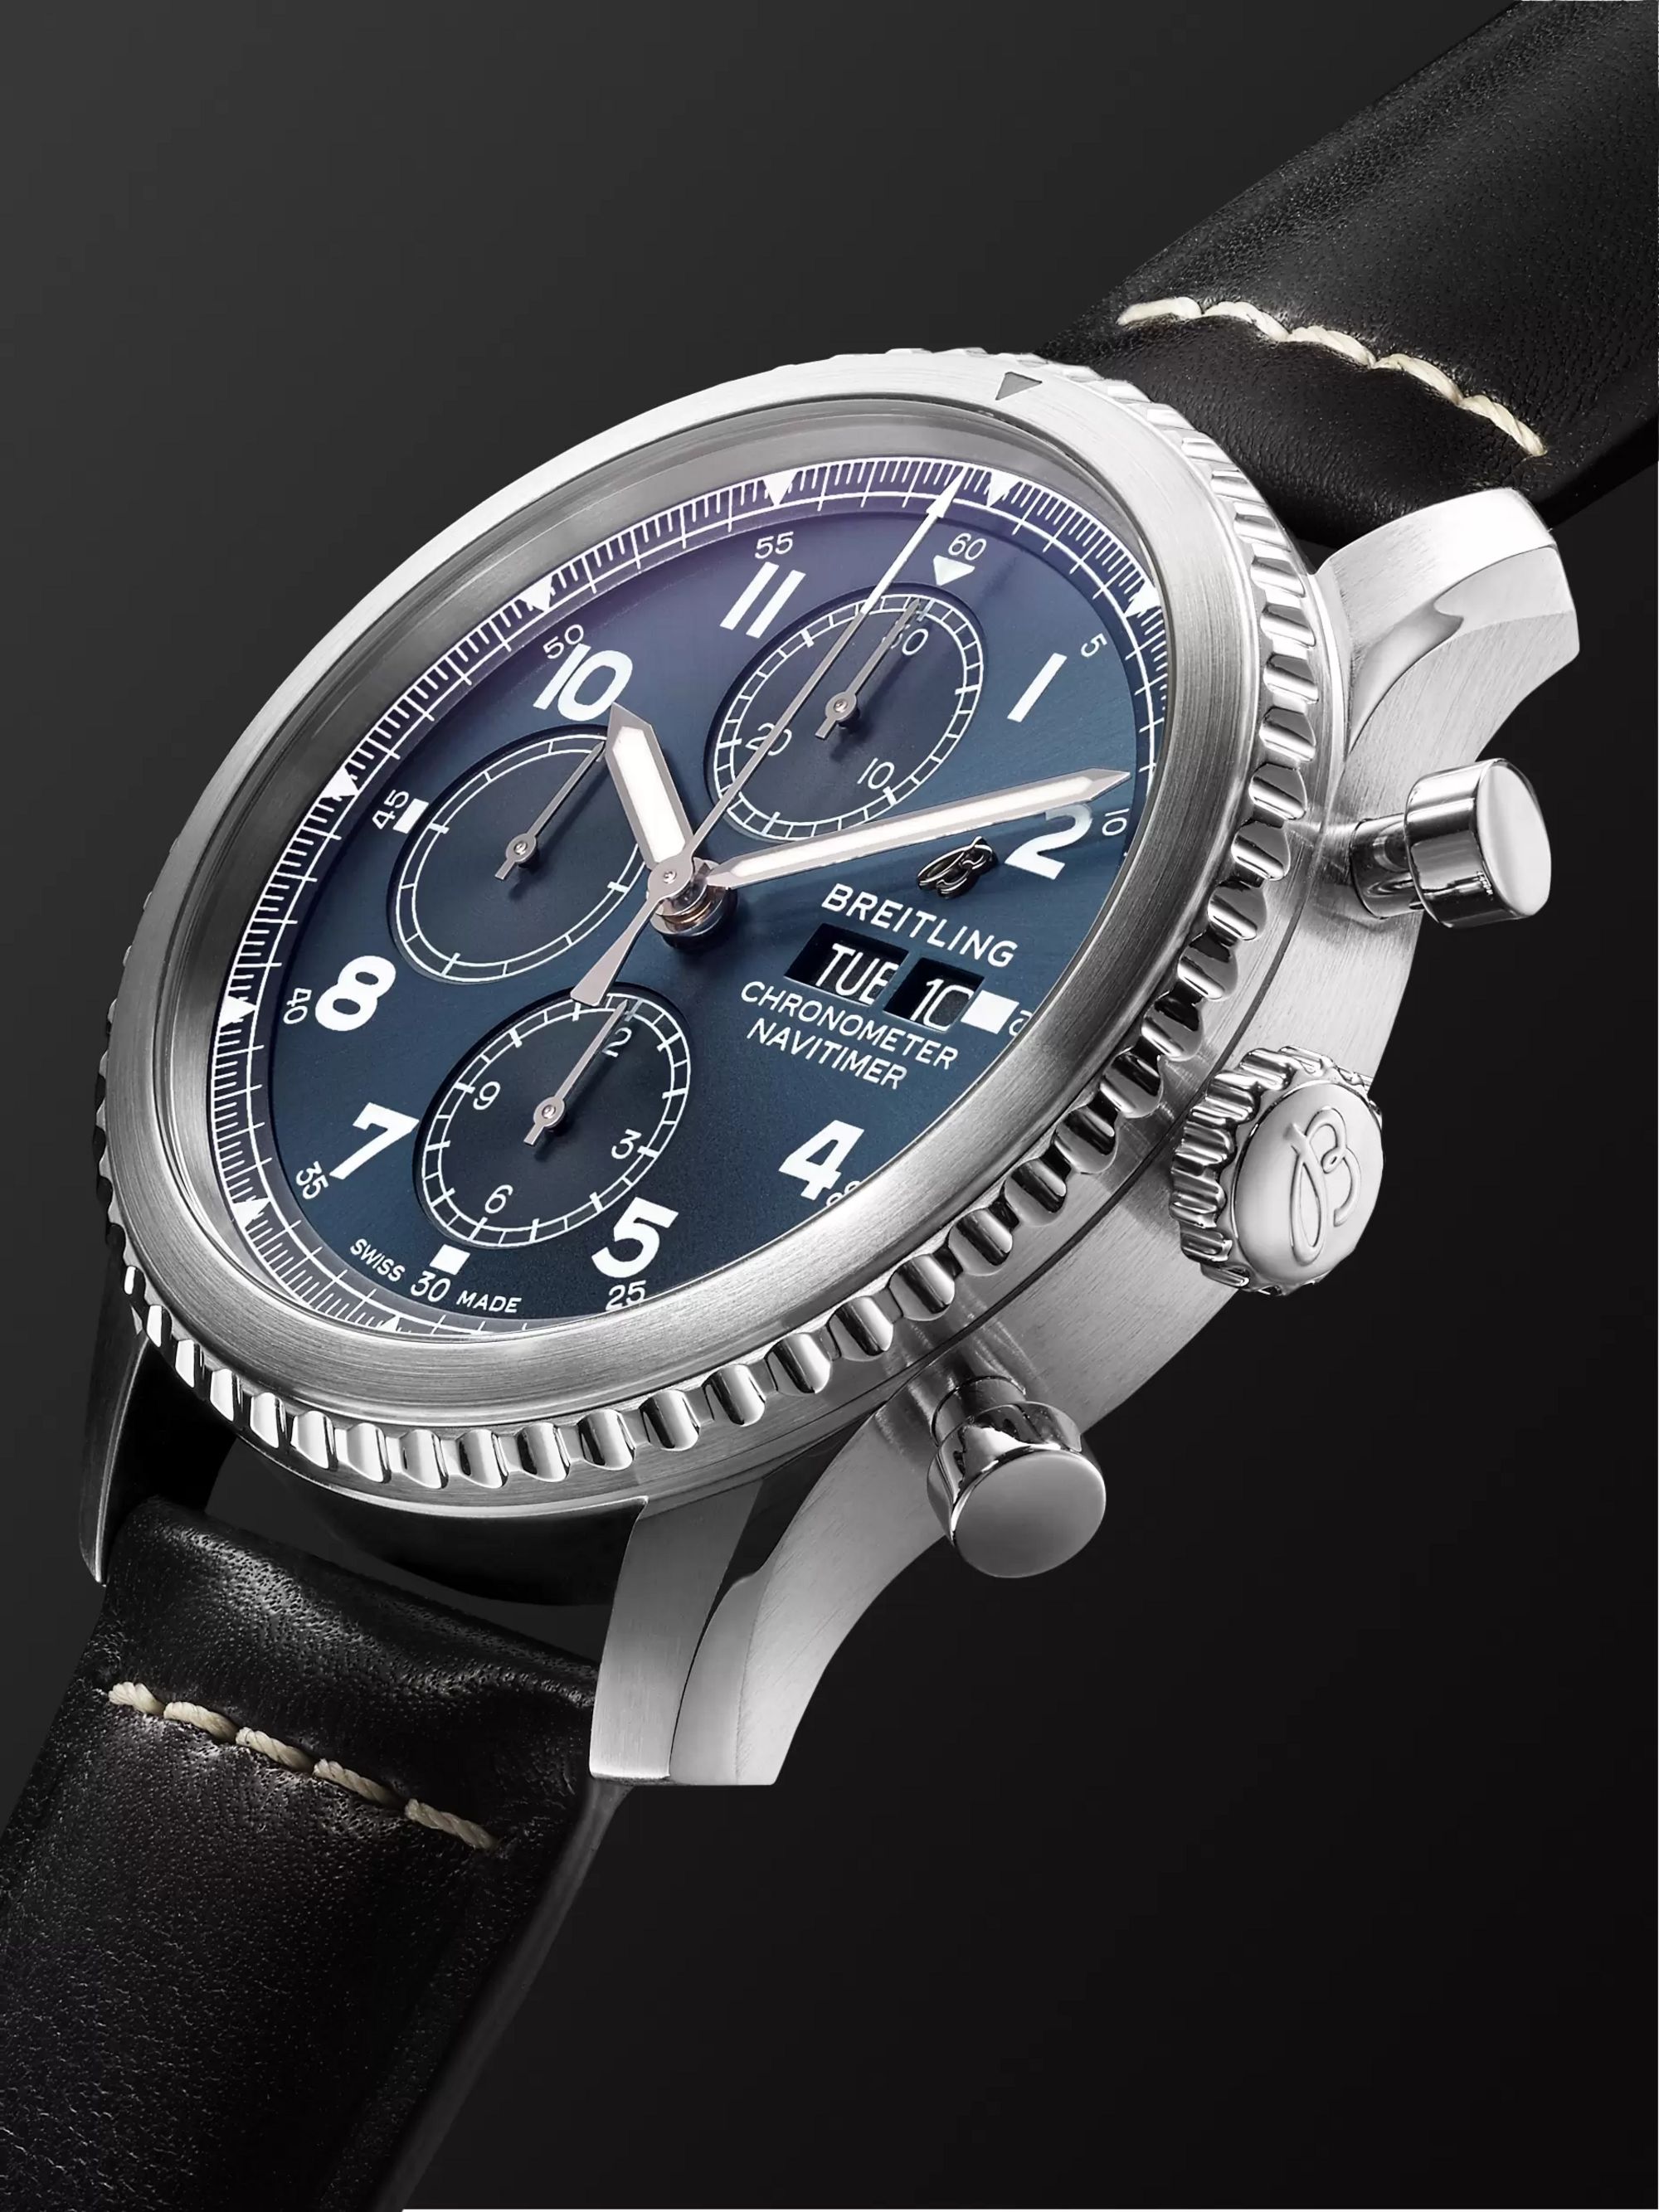 BREITLING Navitimer 8 Automatic Chronograph 43mm Steel and Leather Watch, Ref. No. A13314101C1X1